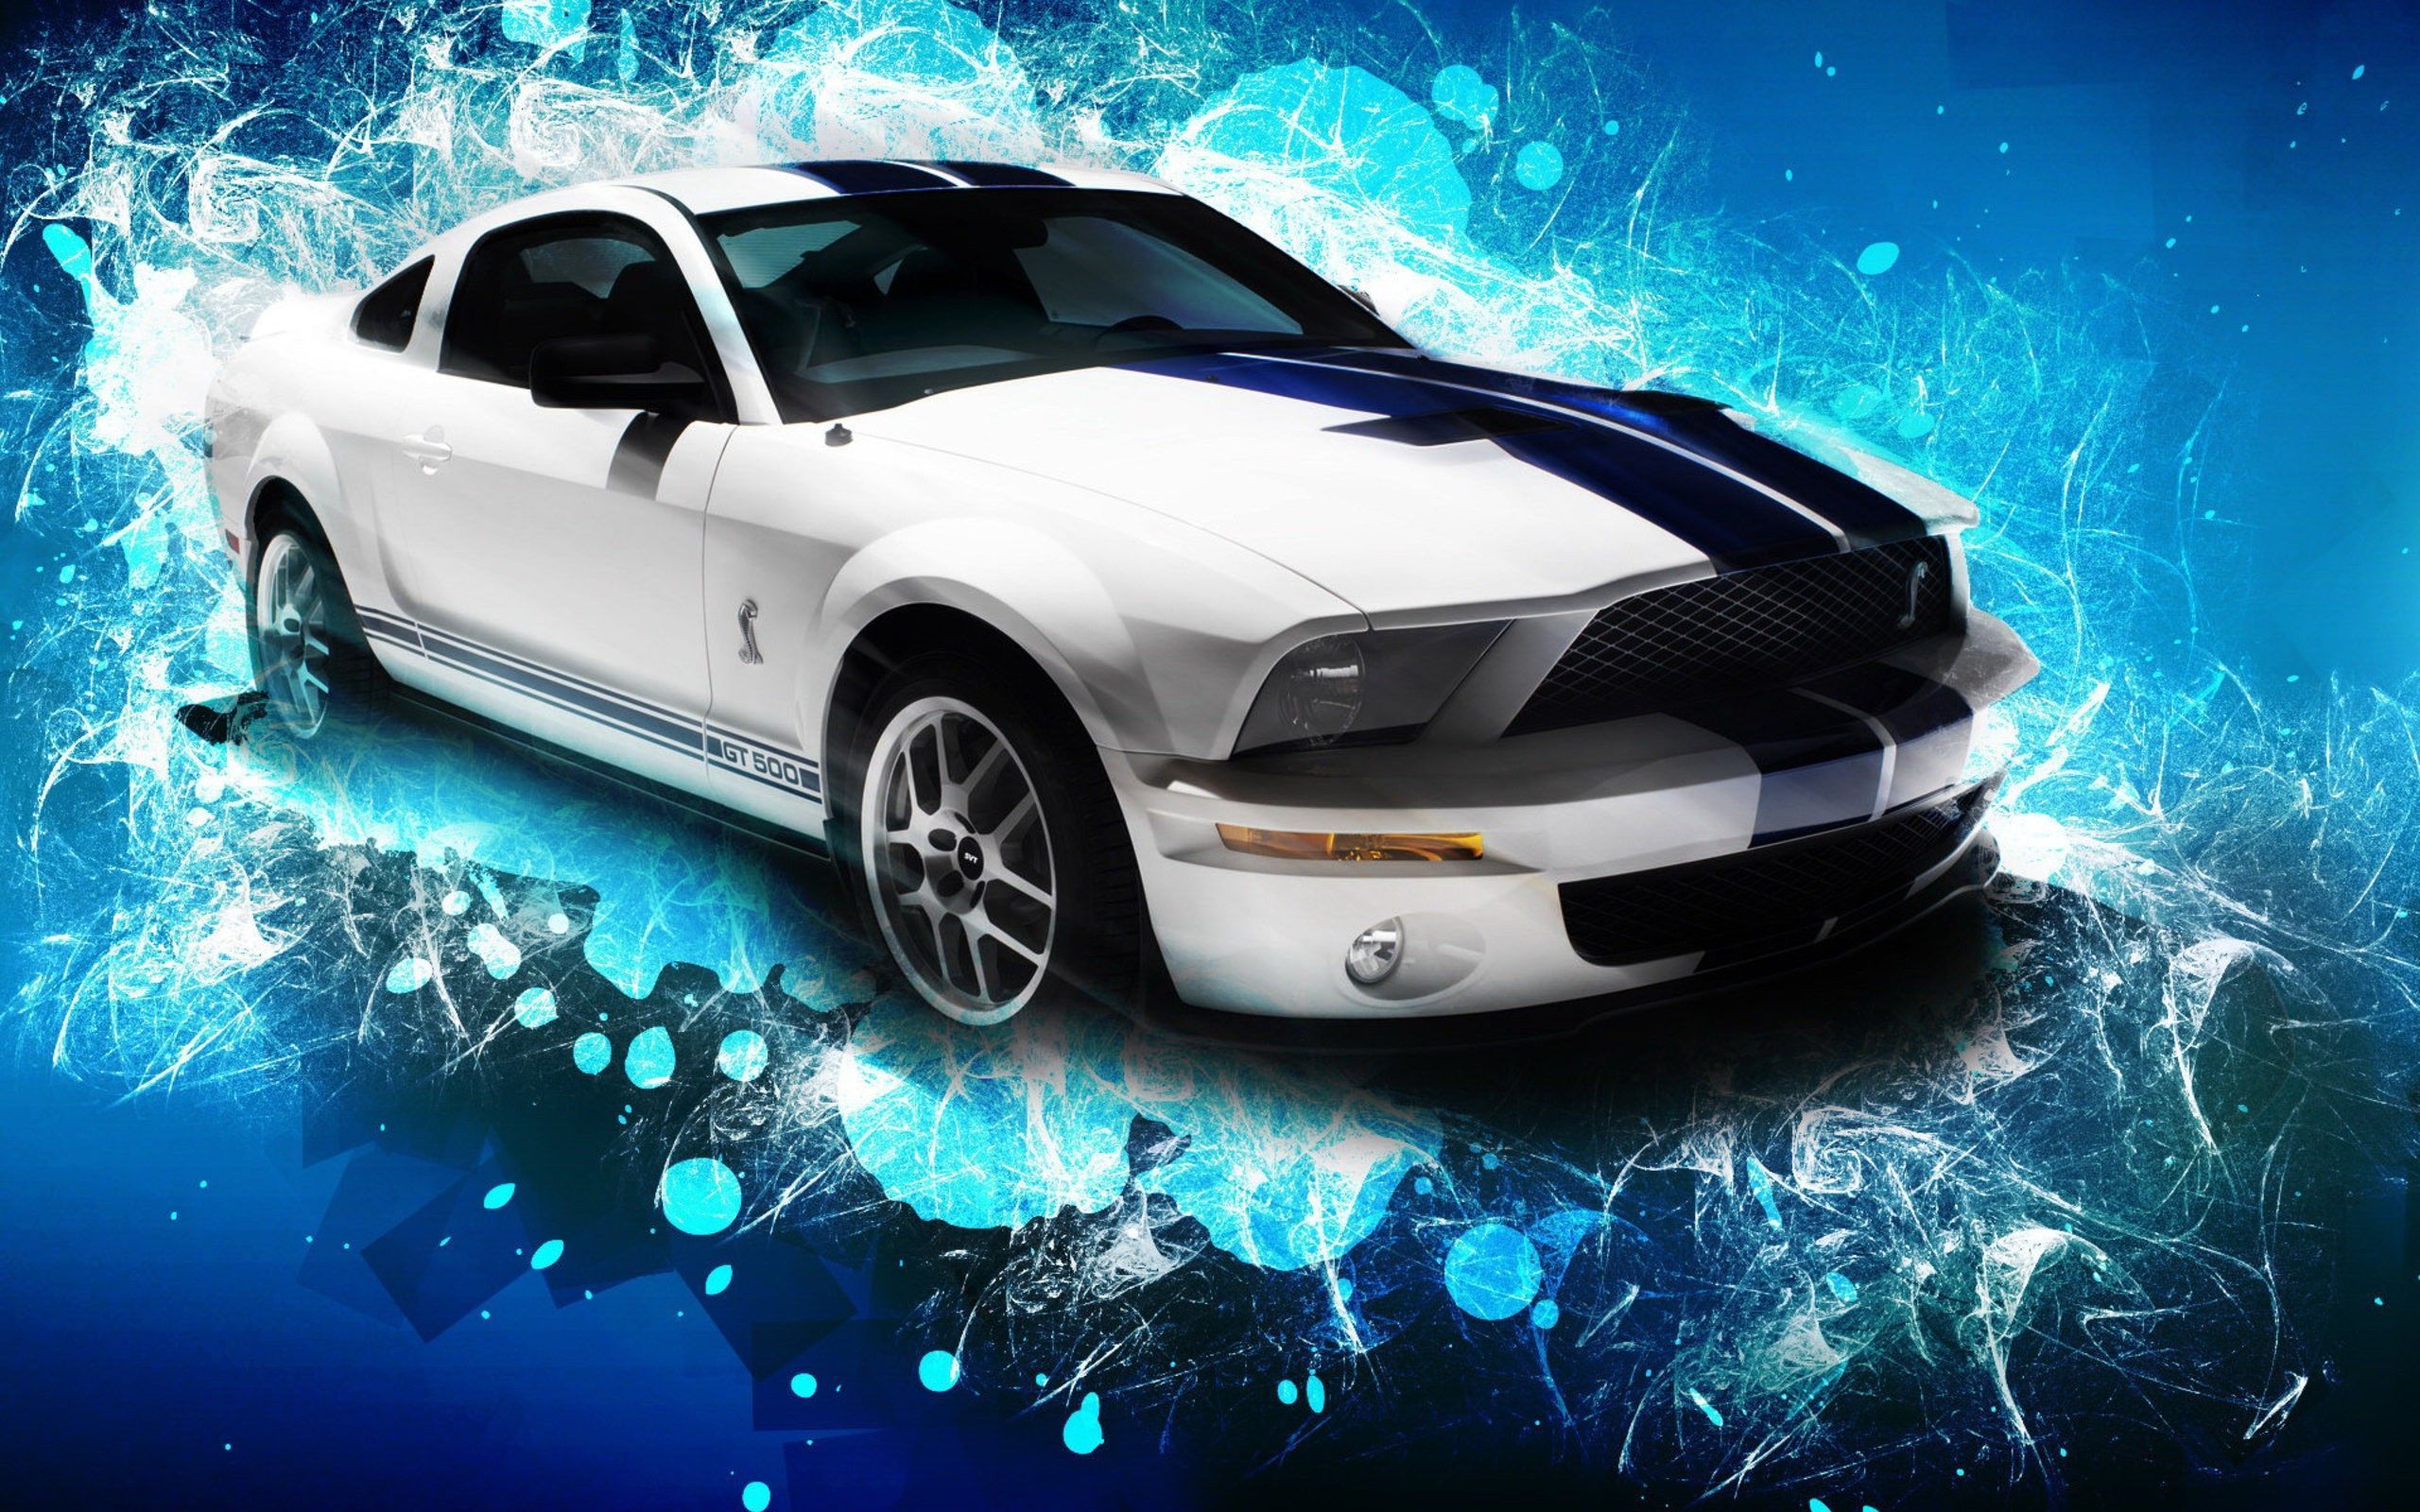 Cool Car Wallpapers For Laptop